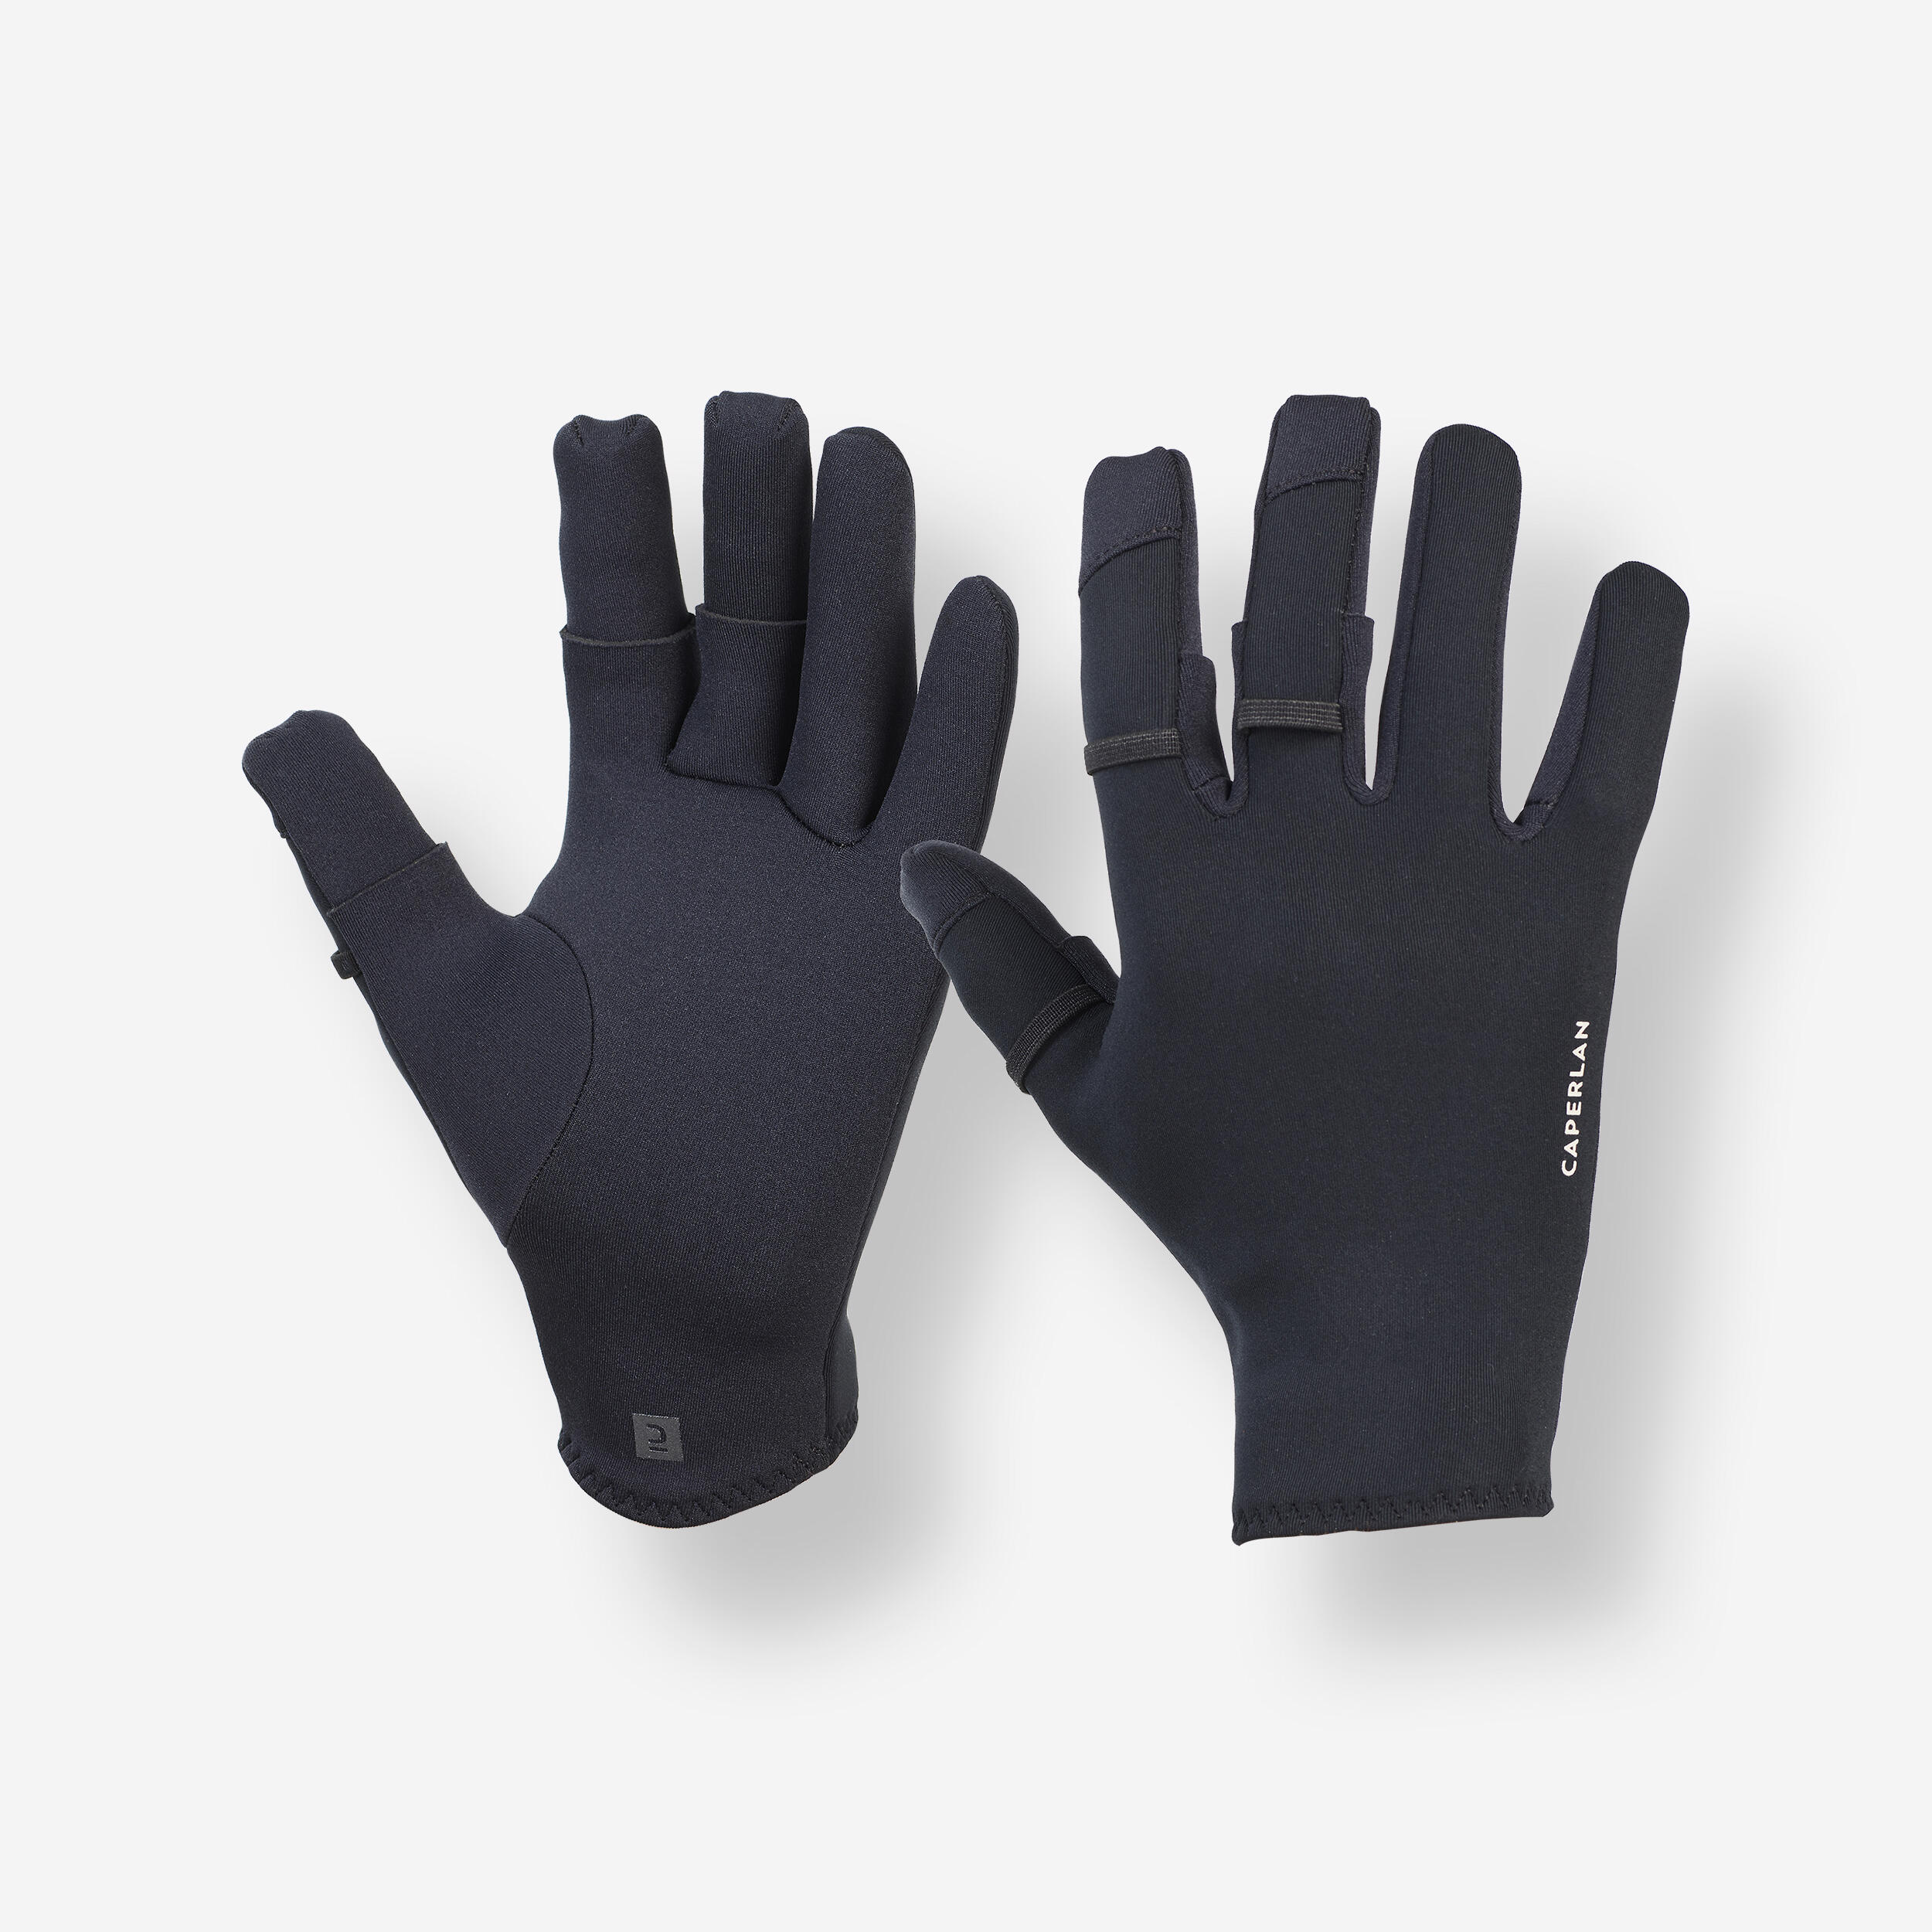 Fishing Neoprene Gloves Thermo with Three Opening Fingers 1 mm - 500 Black  - black - Caperlan - Decathlon